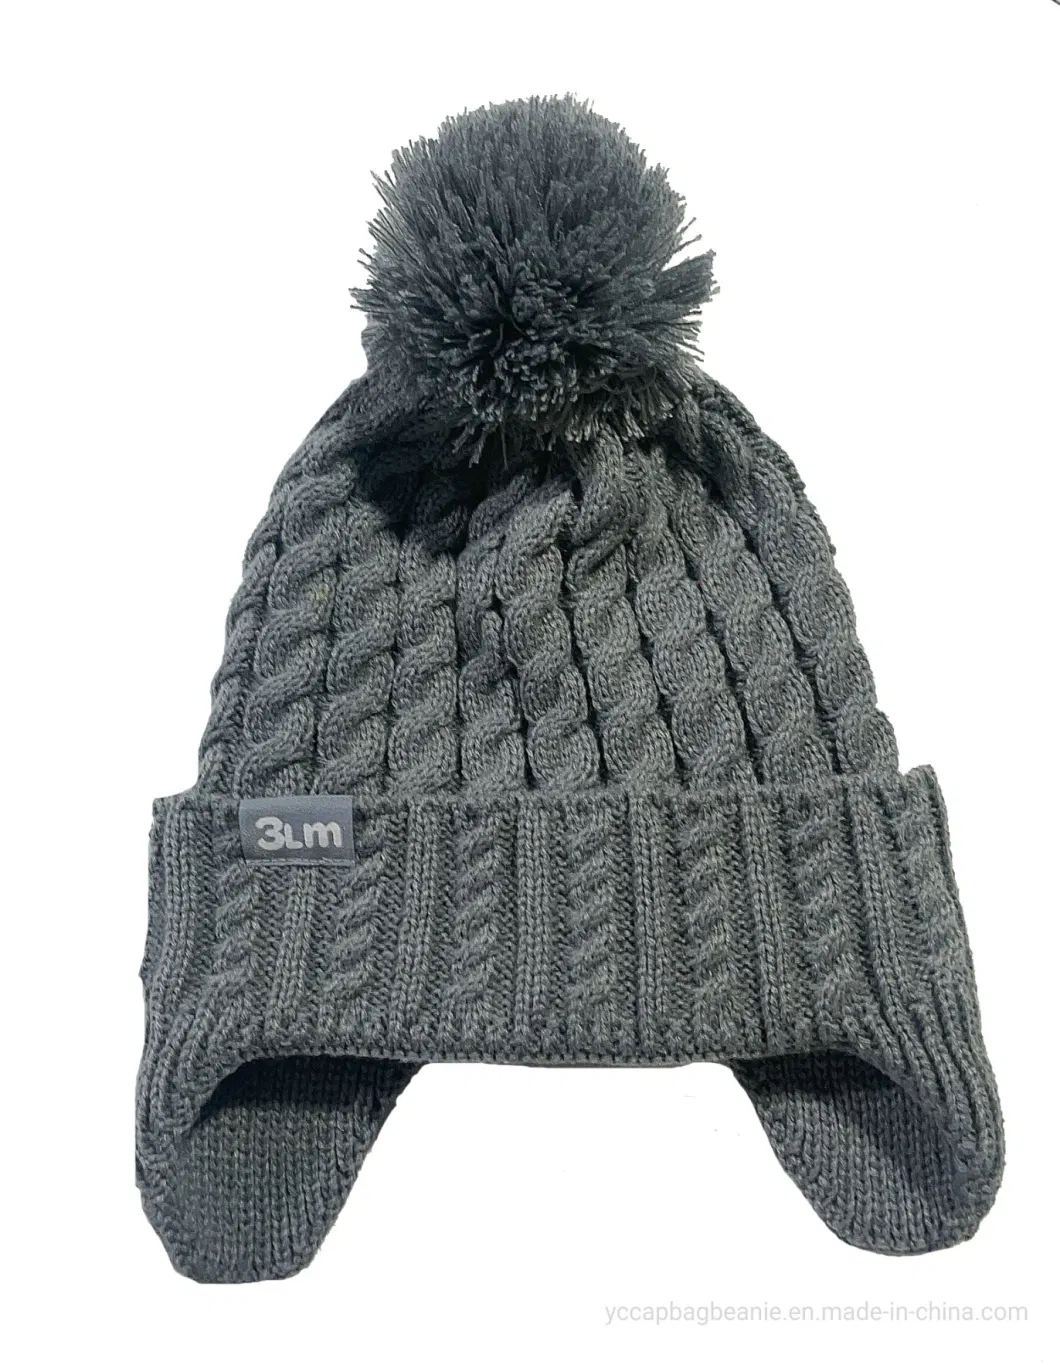 New Arrvial Earflap with POM POM Knitted Hat/Beanie